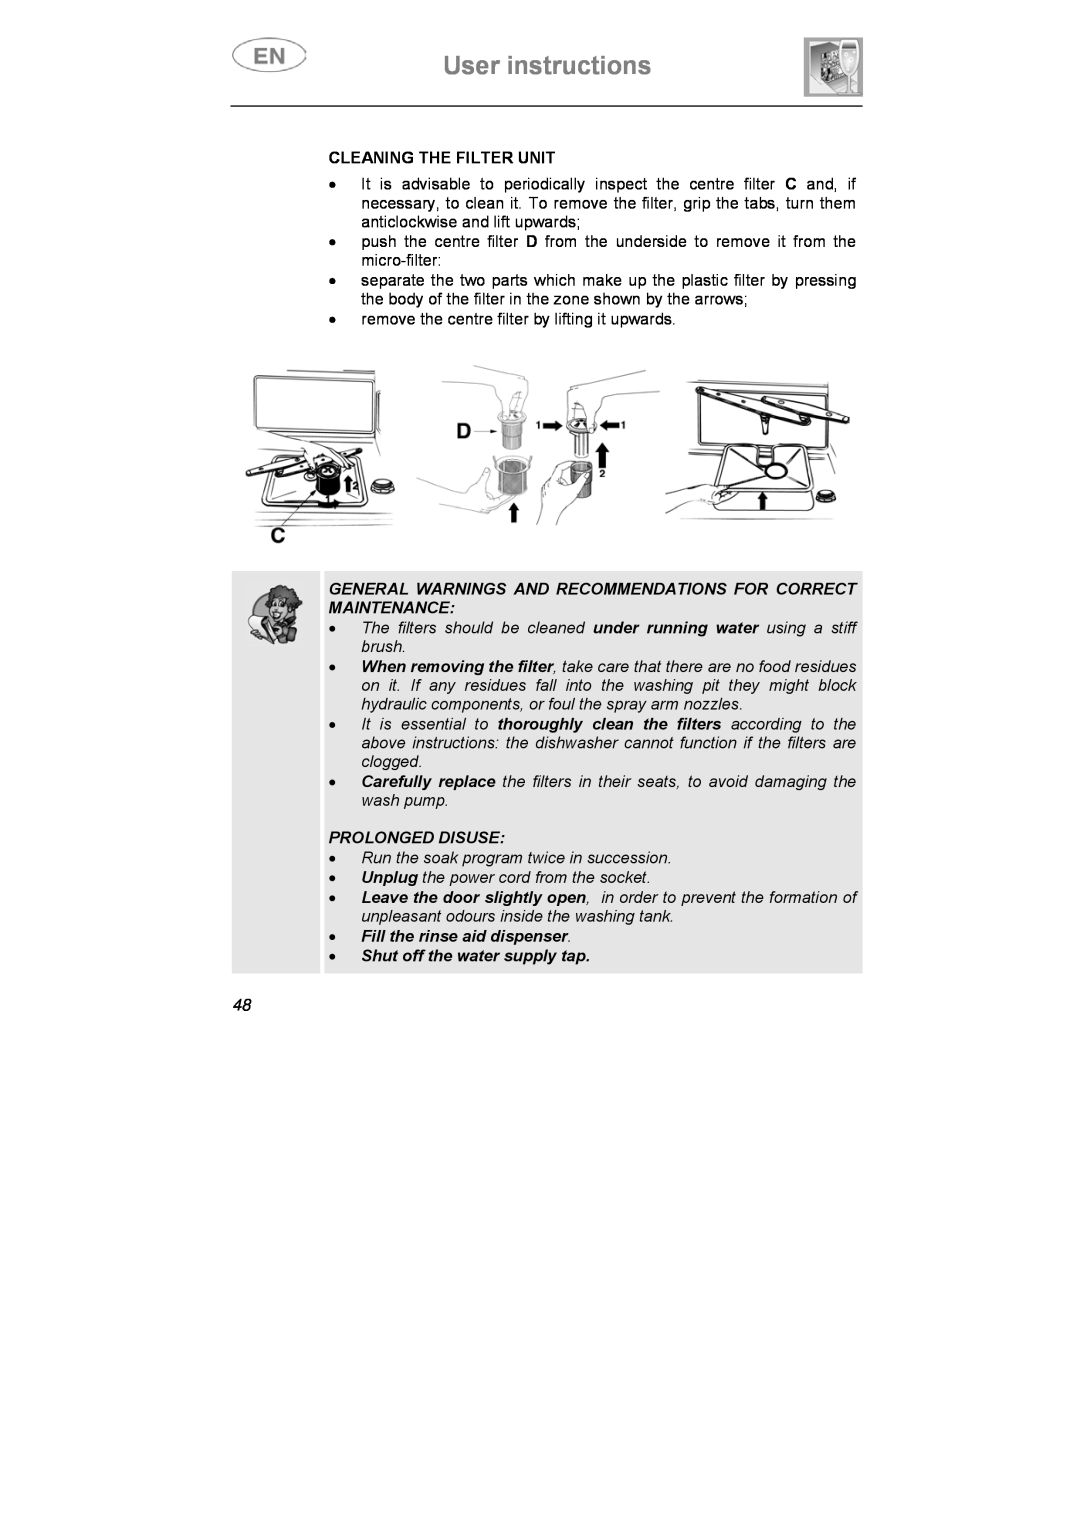 CDA VW80 manual User instructions, Cleaning The Filter Unit, General Warnings And Recommendations For Correct Maintenance 